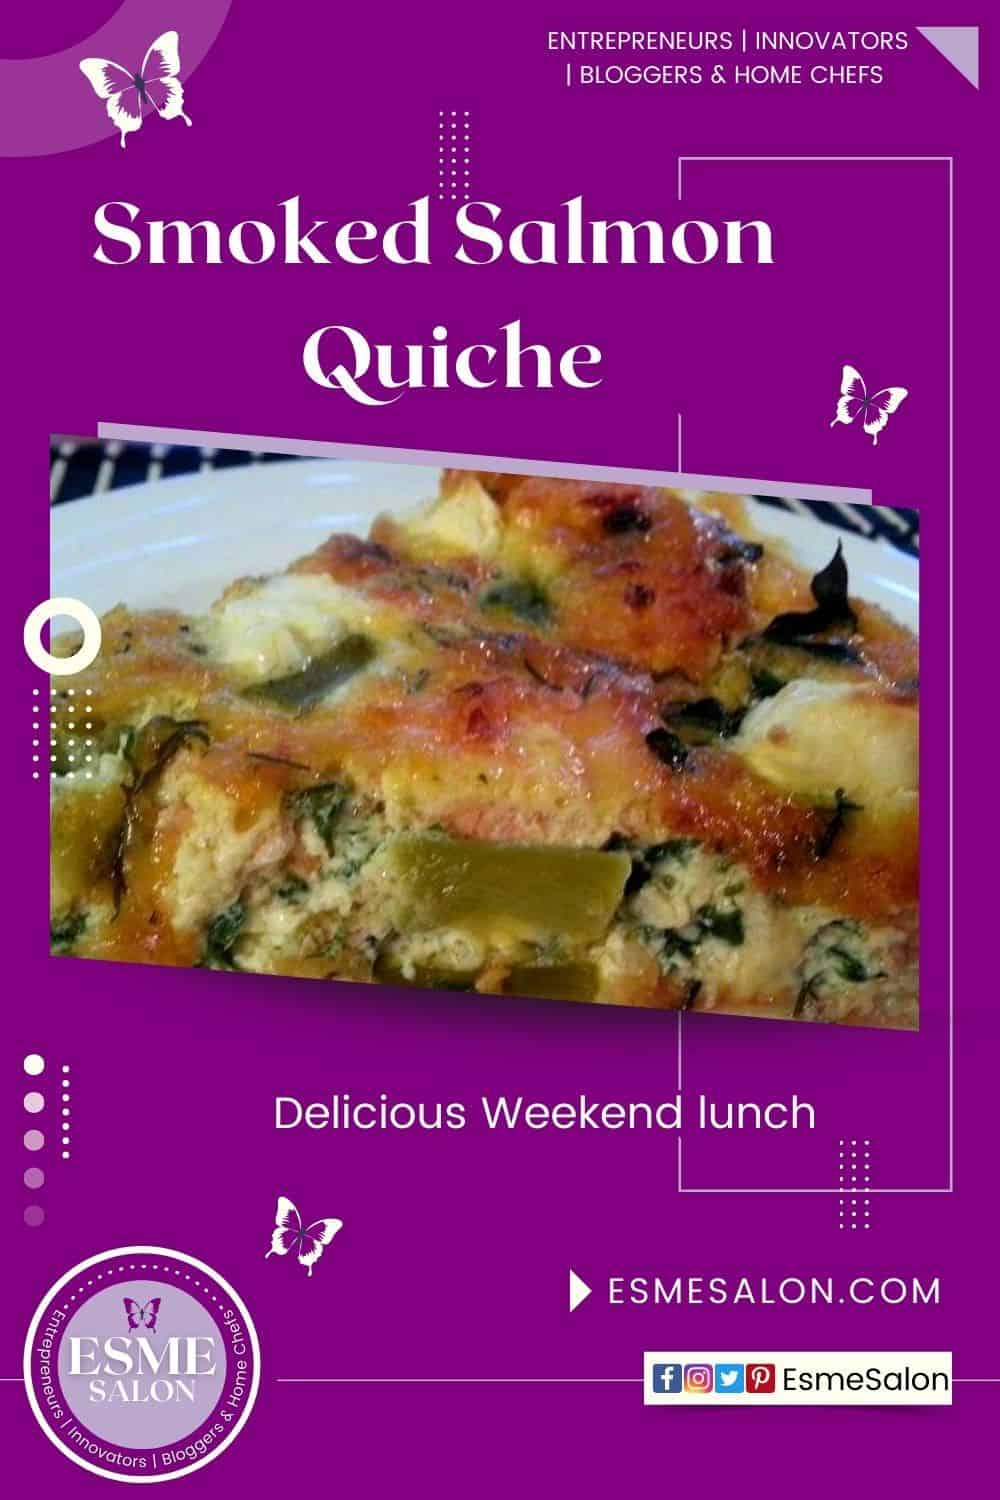 Smoked Salmon Quiche for an easy weekend lunch